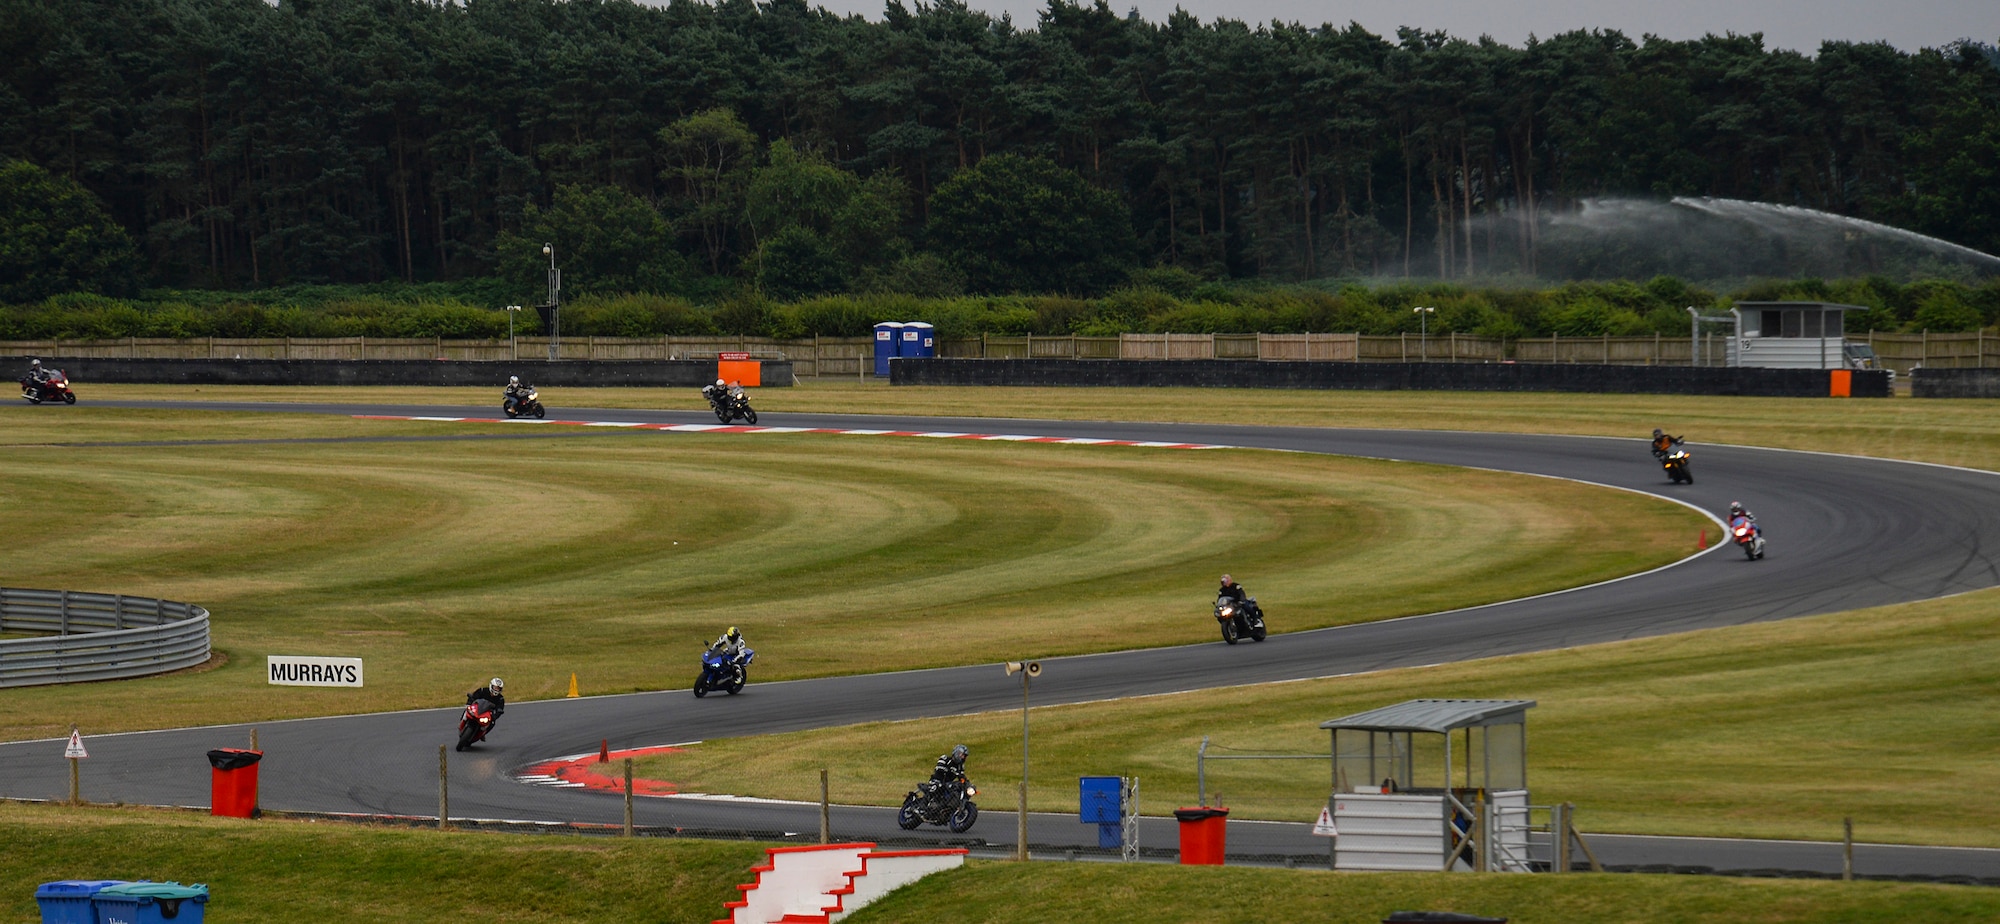 Participants in the Military Track Day ride their motorcycles July 26, 2016, at Snetterton Circuit in Norwich, England. The track day was coordinated to boost rider confidence and skill. (U.S. Air Force photo by Staff Sgt. Micaiah Anthony)